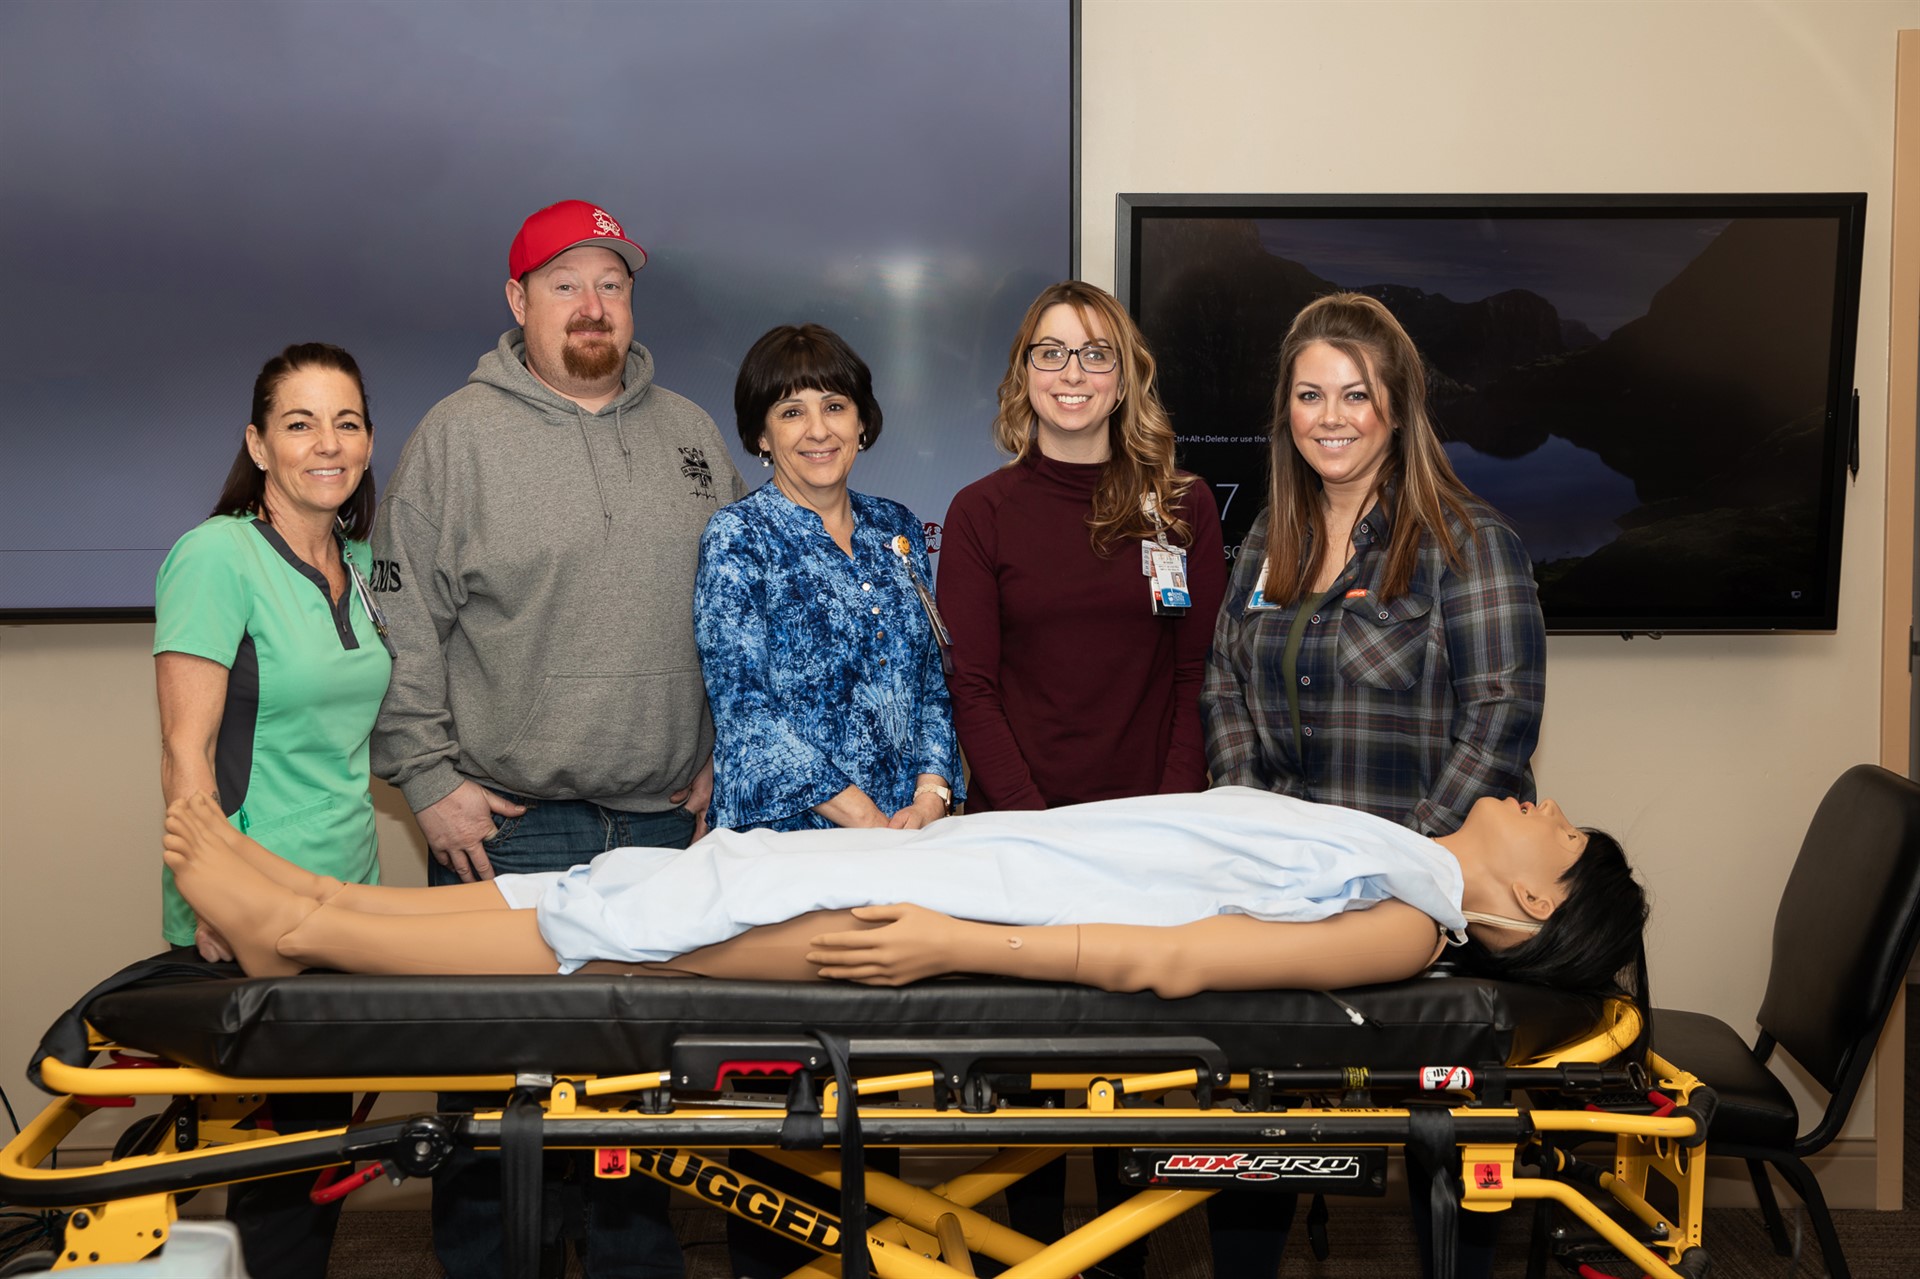 New Simulation Manikin expands Staff Education and Training